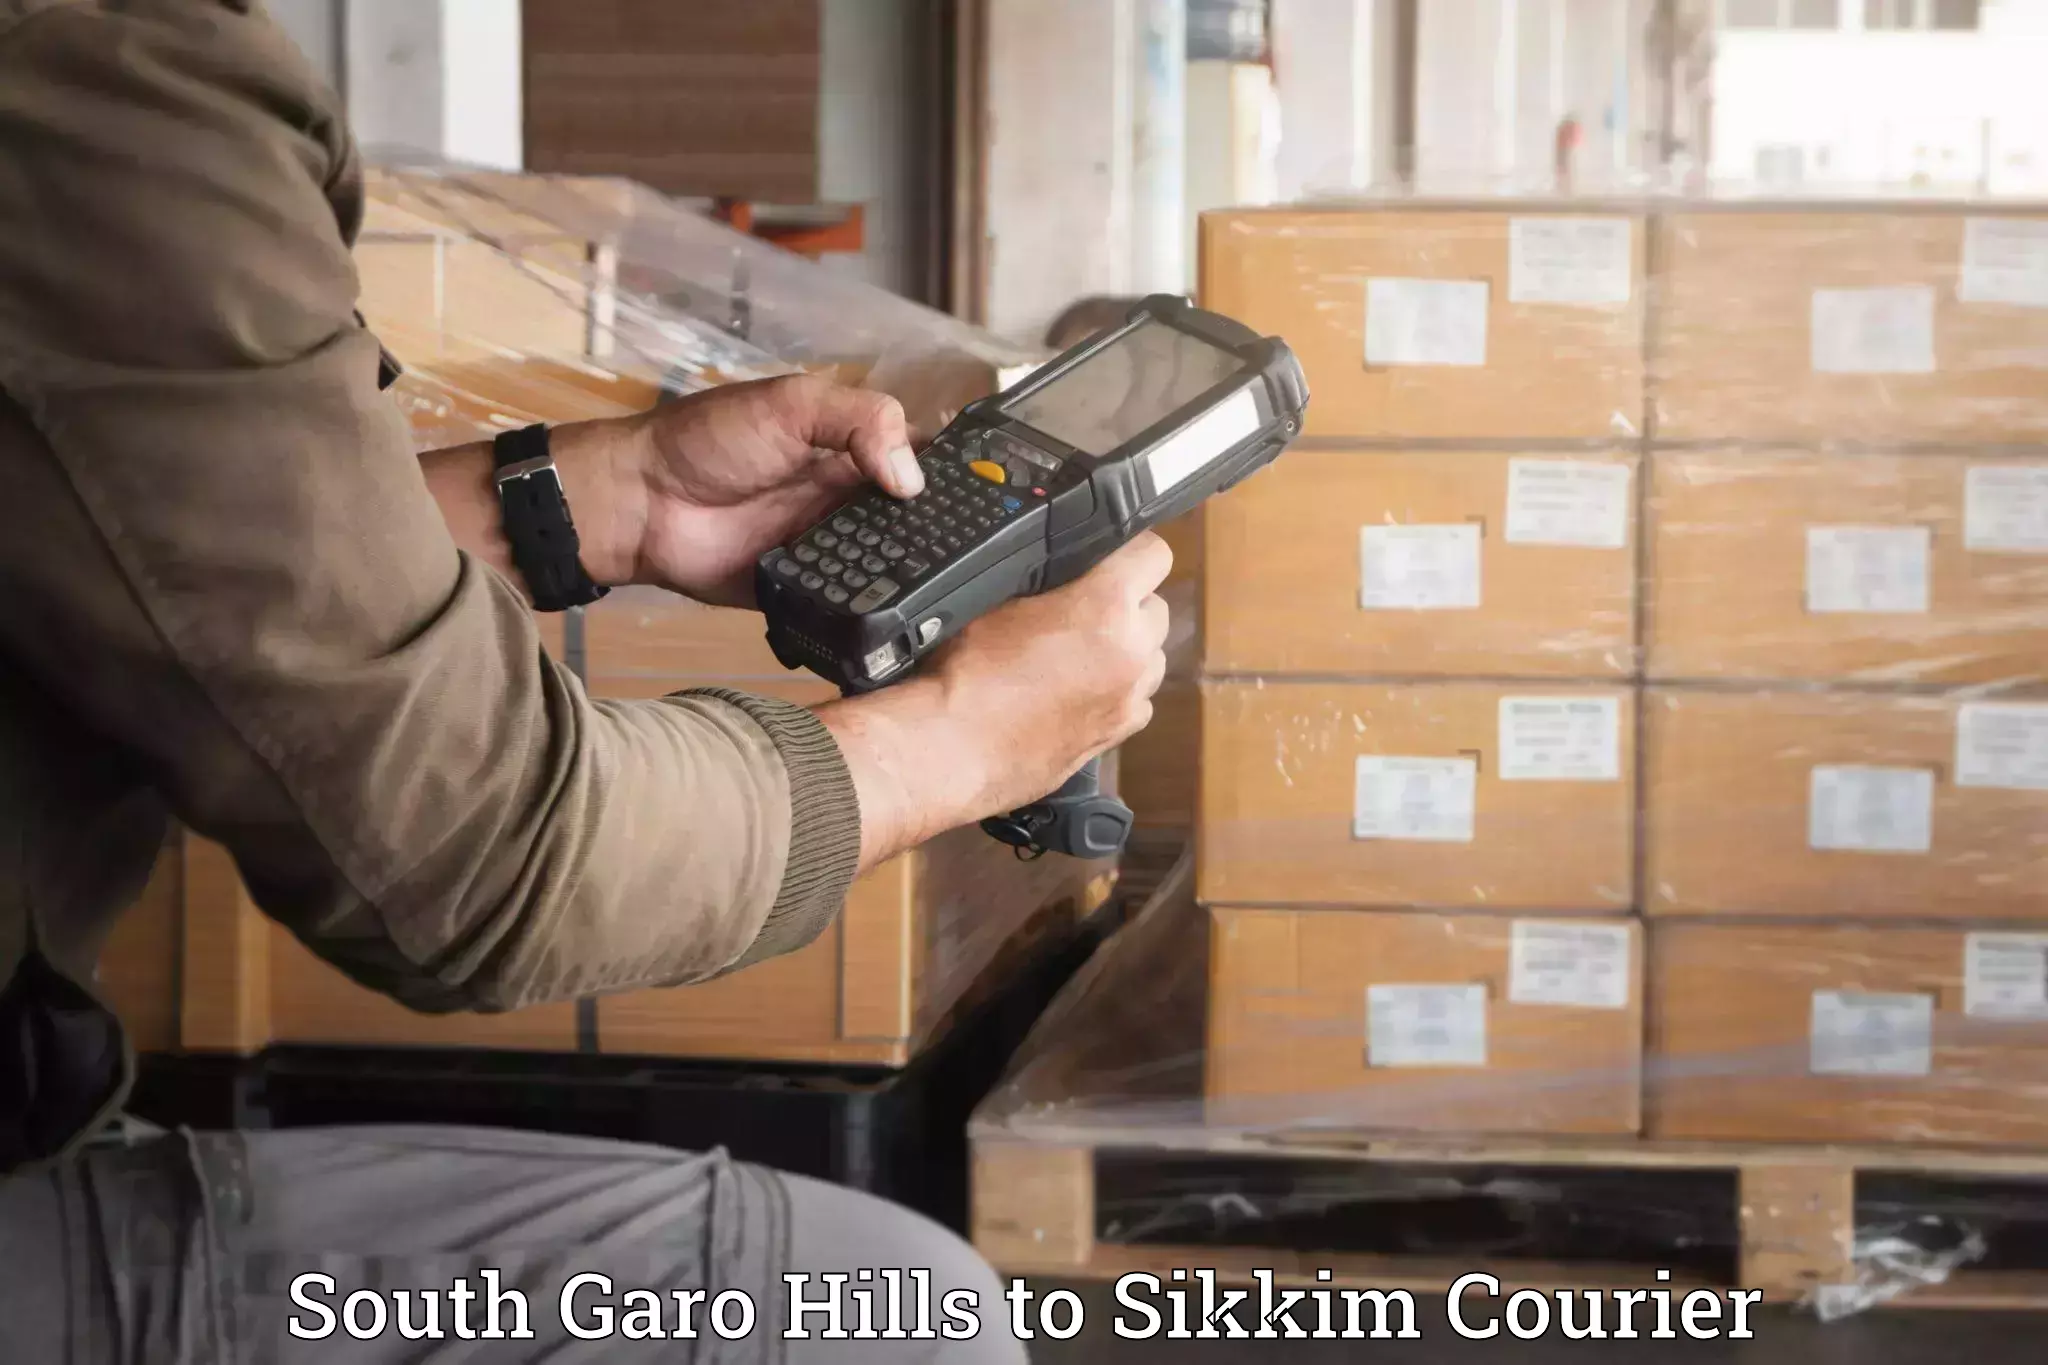 Packing and moving services South Garo Hills to South Sikkim